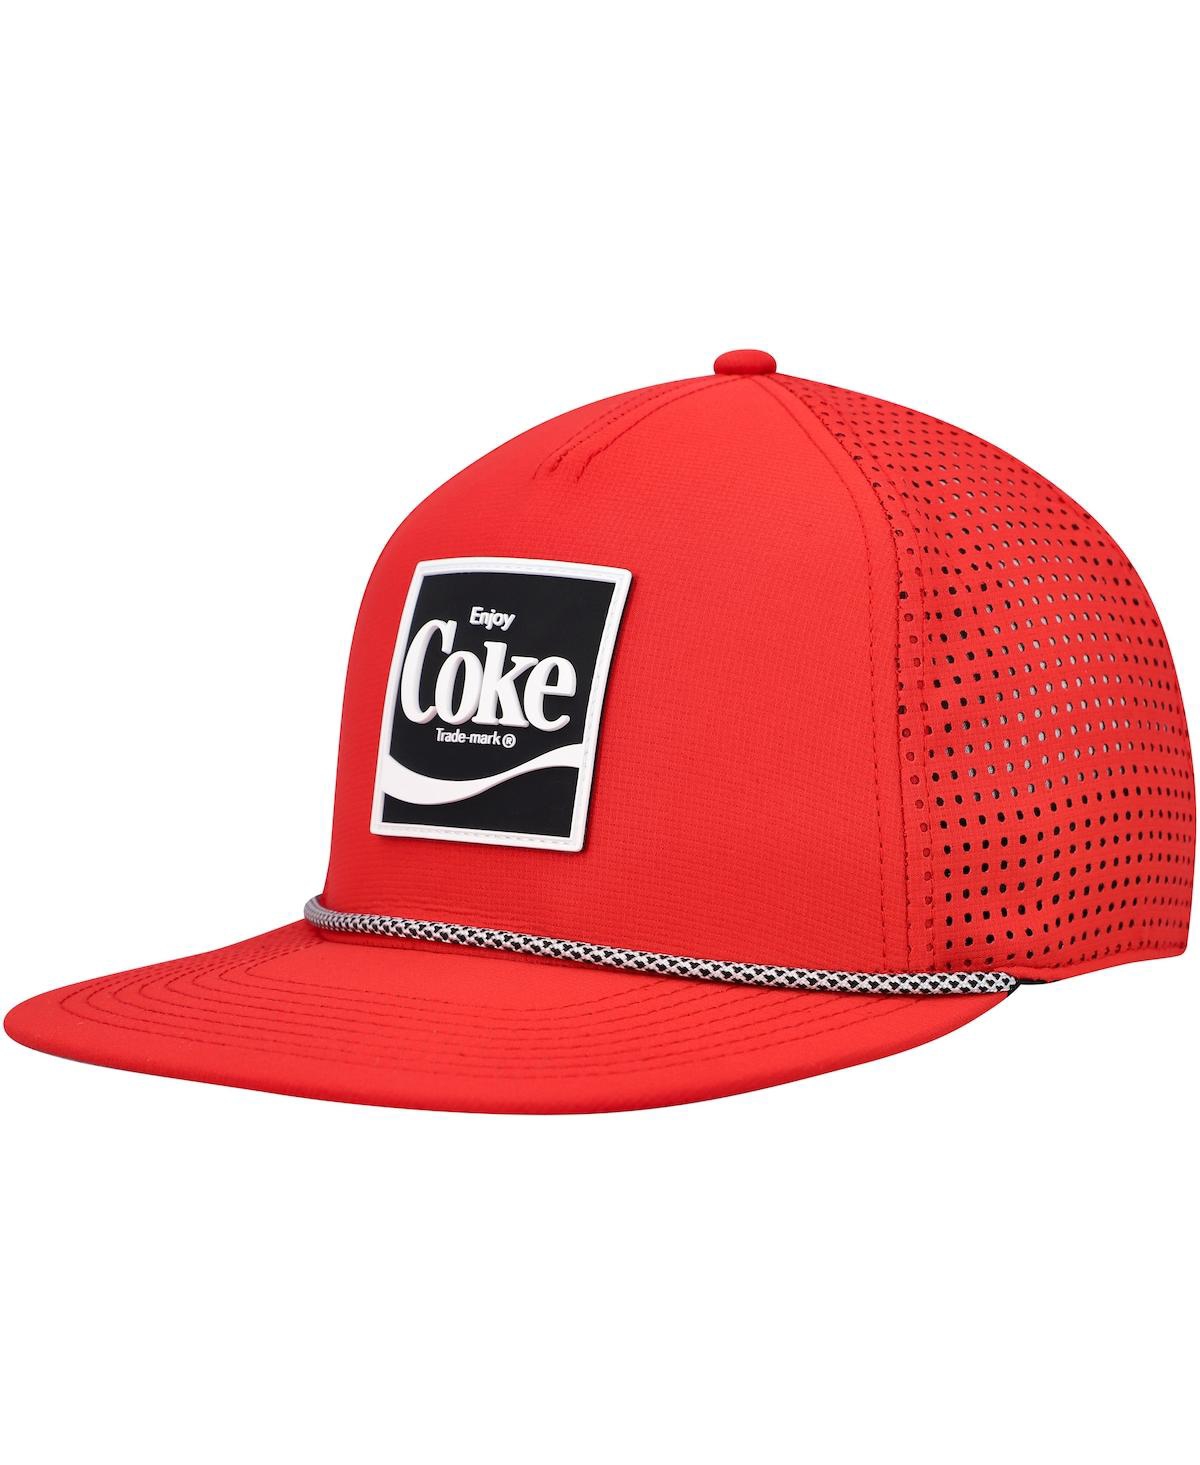 Men's Red Coca-Cola Buxton Pro Adjustable Hat - Red